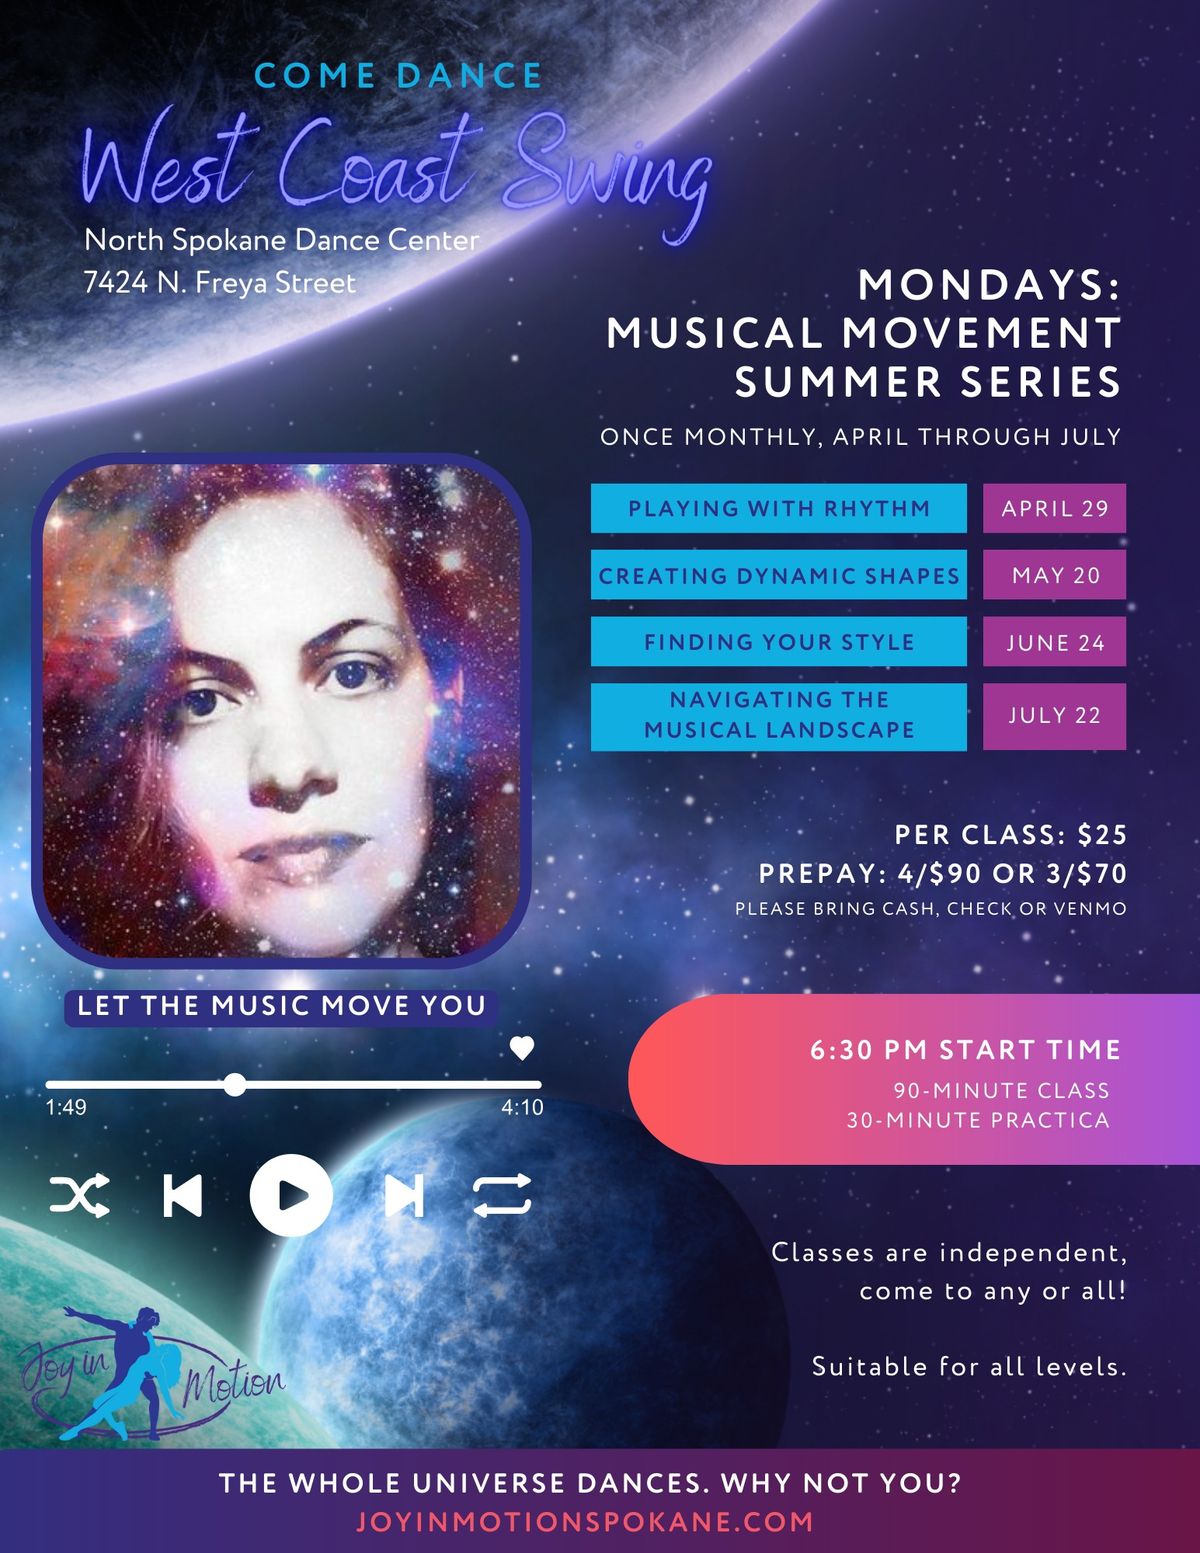 Musical Movement Summer Series: Class 3 - Finding Your Style